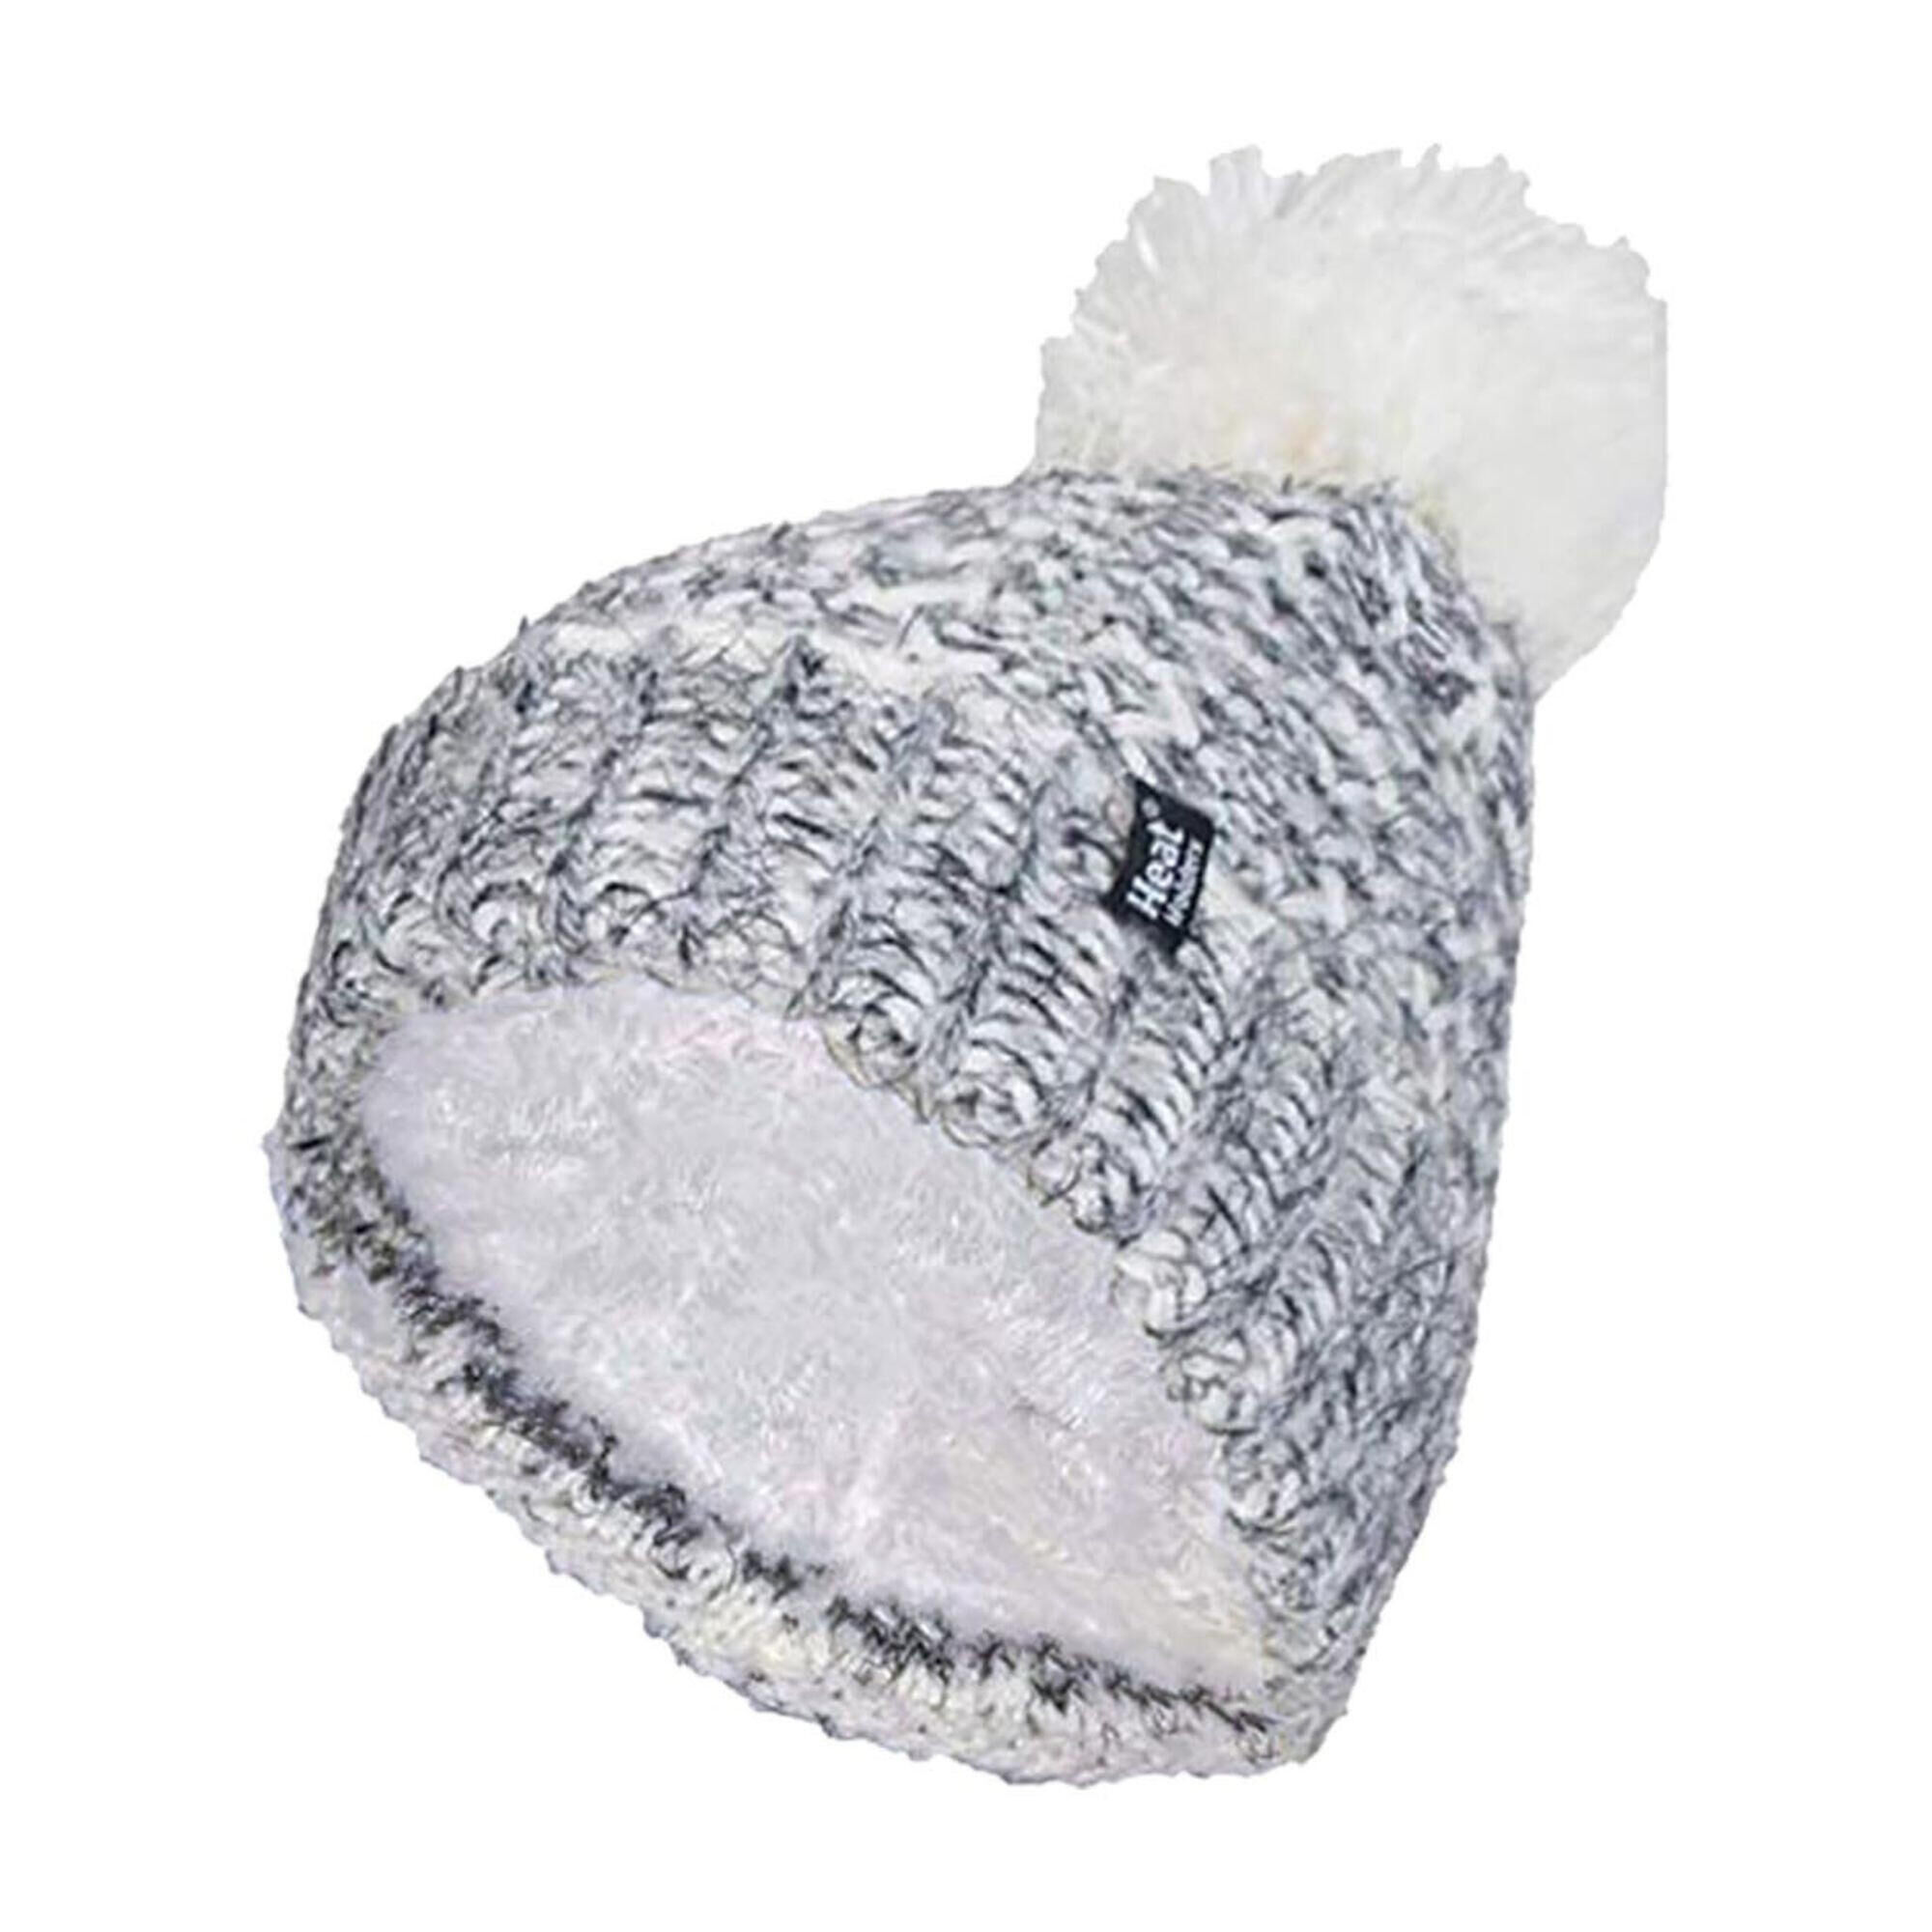 HEAT HOLDERS Ladies Fleece Lined Cuffed Thermal Winter Bobble Hat with Pom Pom